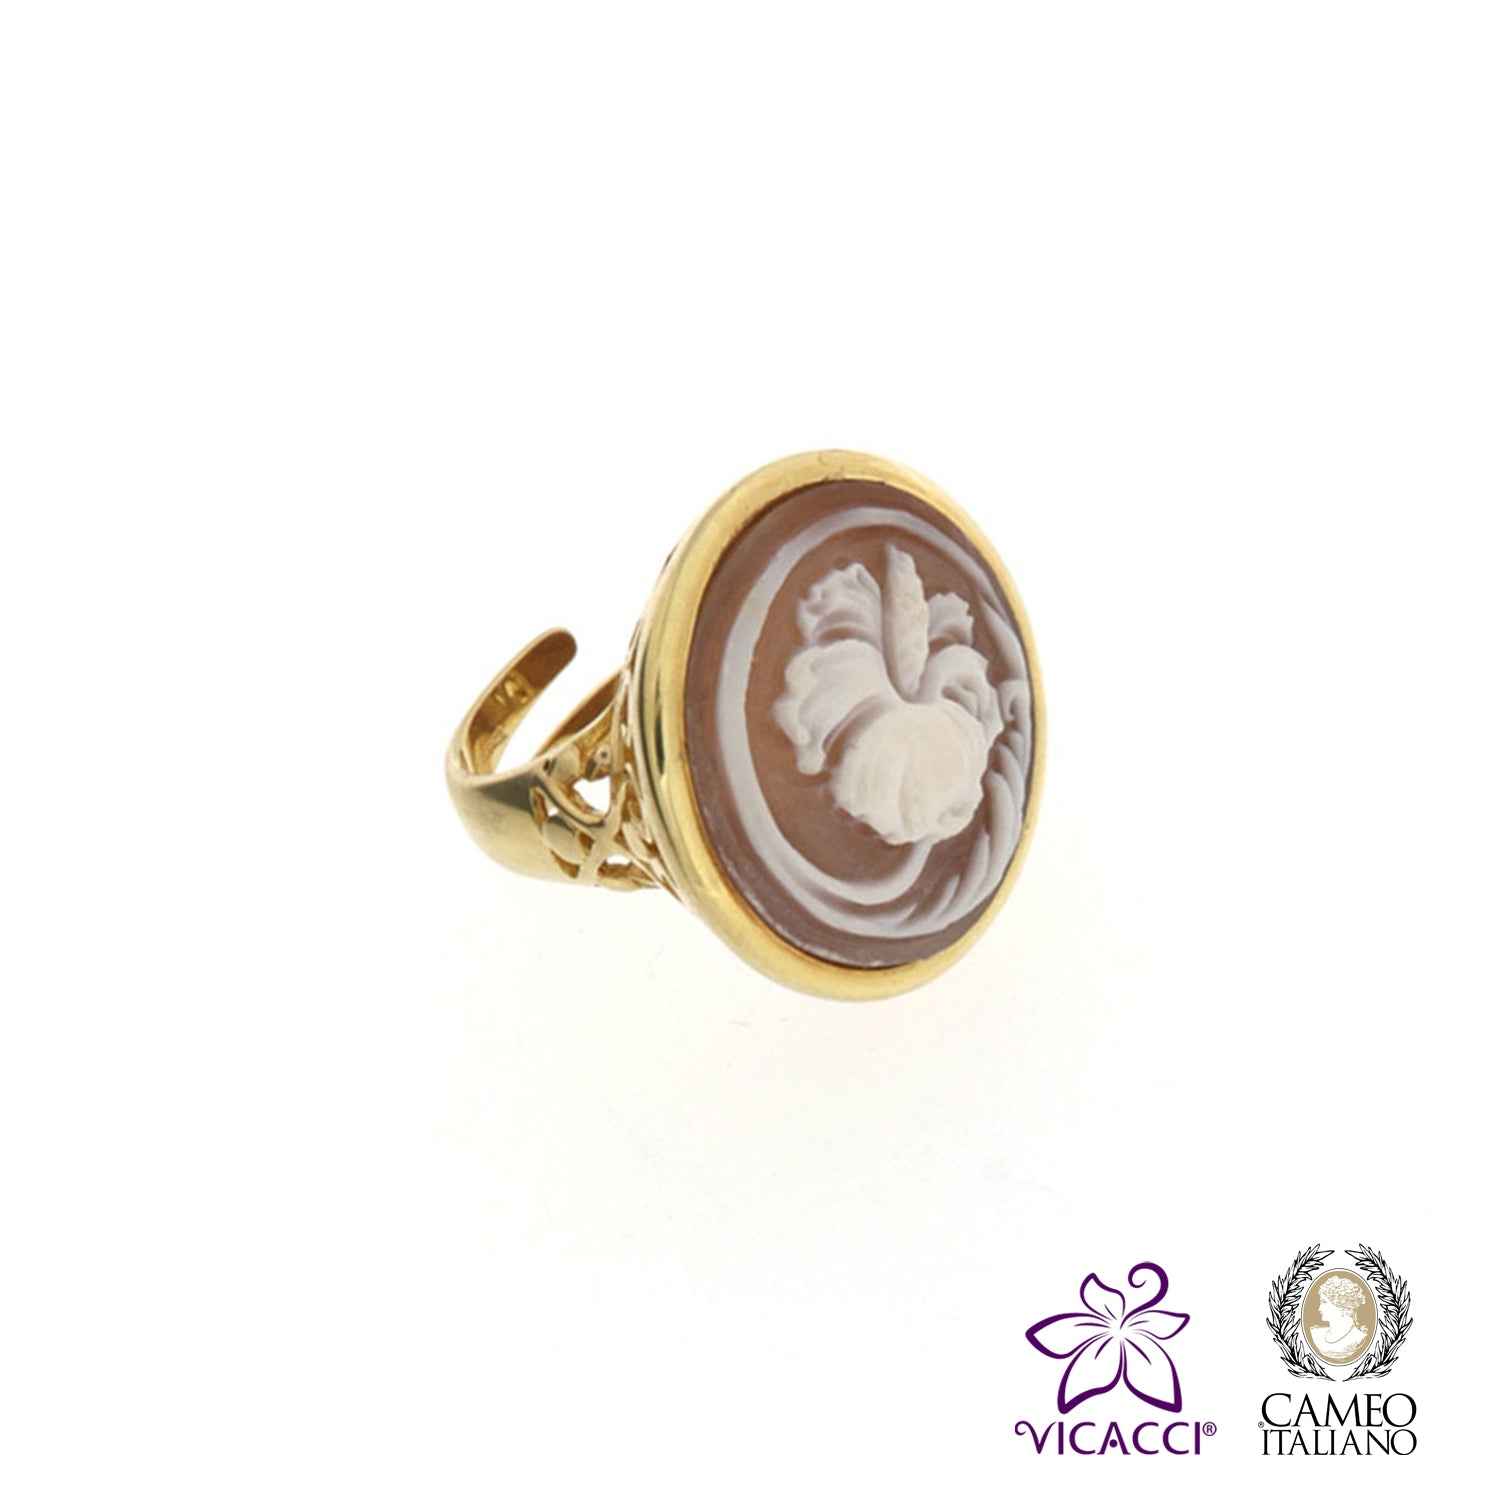 Cameo Italiano, A201 Ring , 925 Sterling Silver Gold Plated